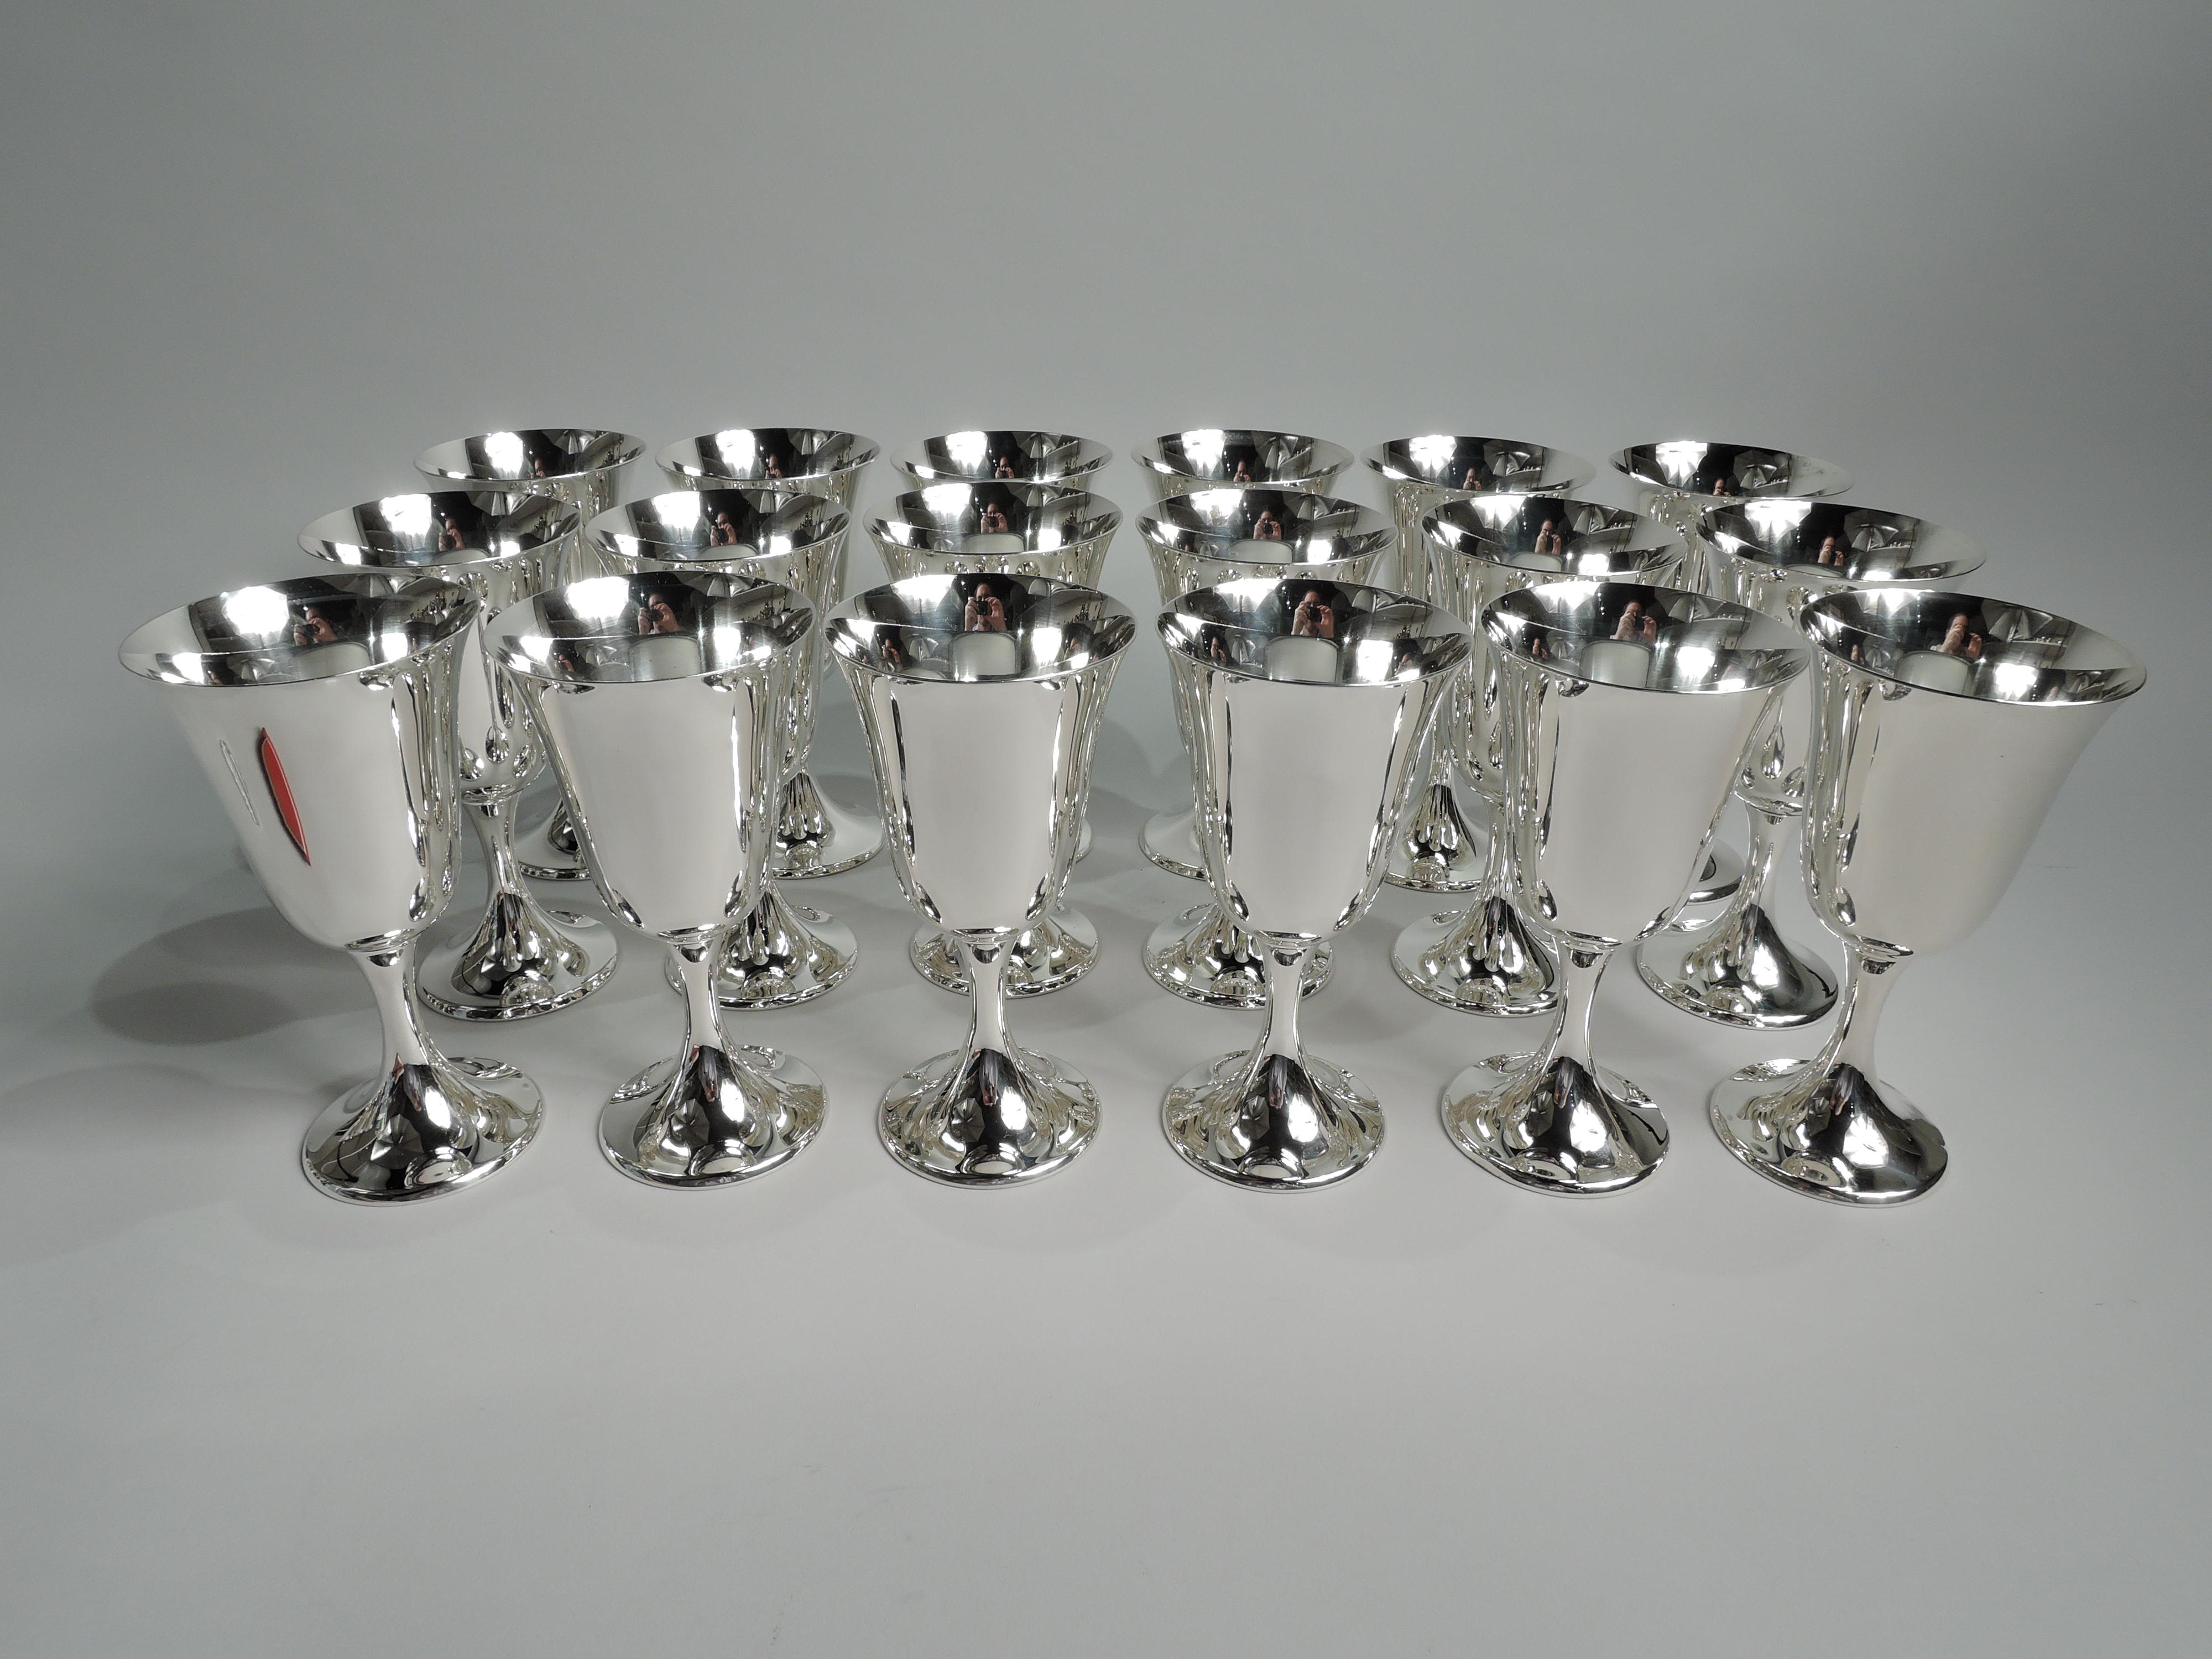 Set of 18 Puritan sterling silver goblets. Made by Gorham in Providence. Each: Spare and elegant form with subtle bell-form bowl on cylindrical stem flowing into raised foot. Works best when filled and refilled. Don’t be fooled by the pattern name.